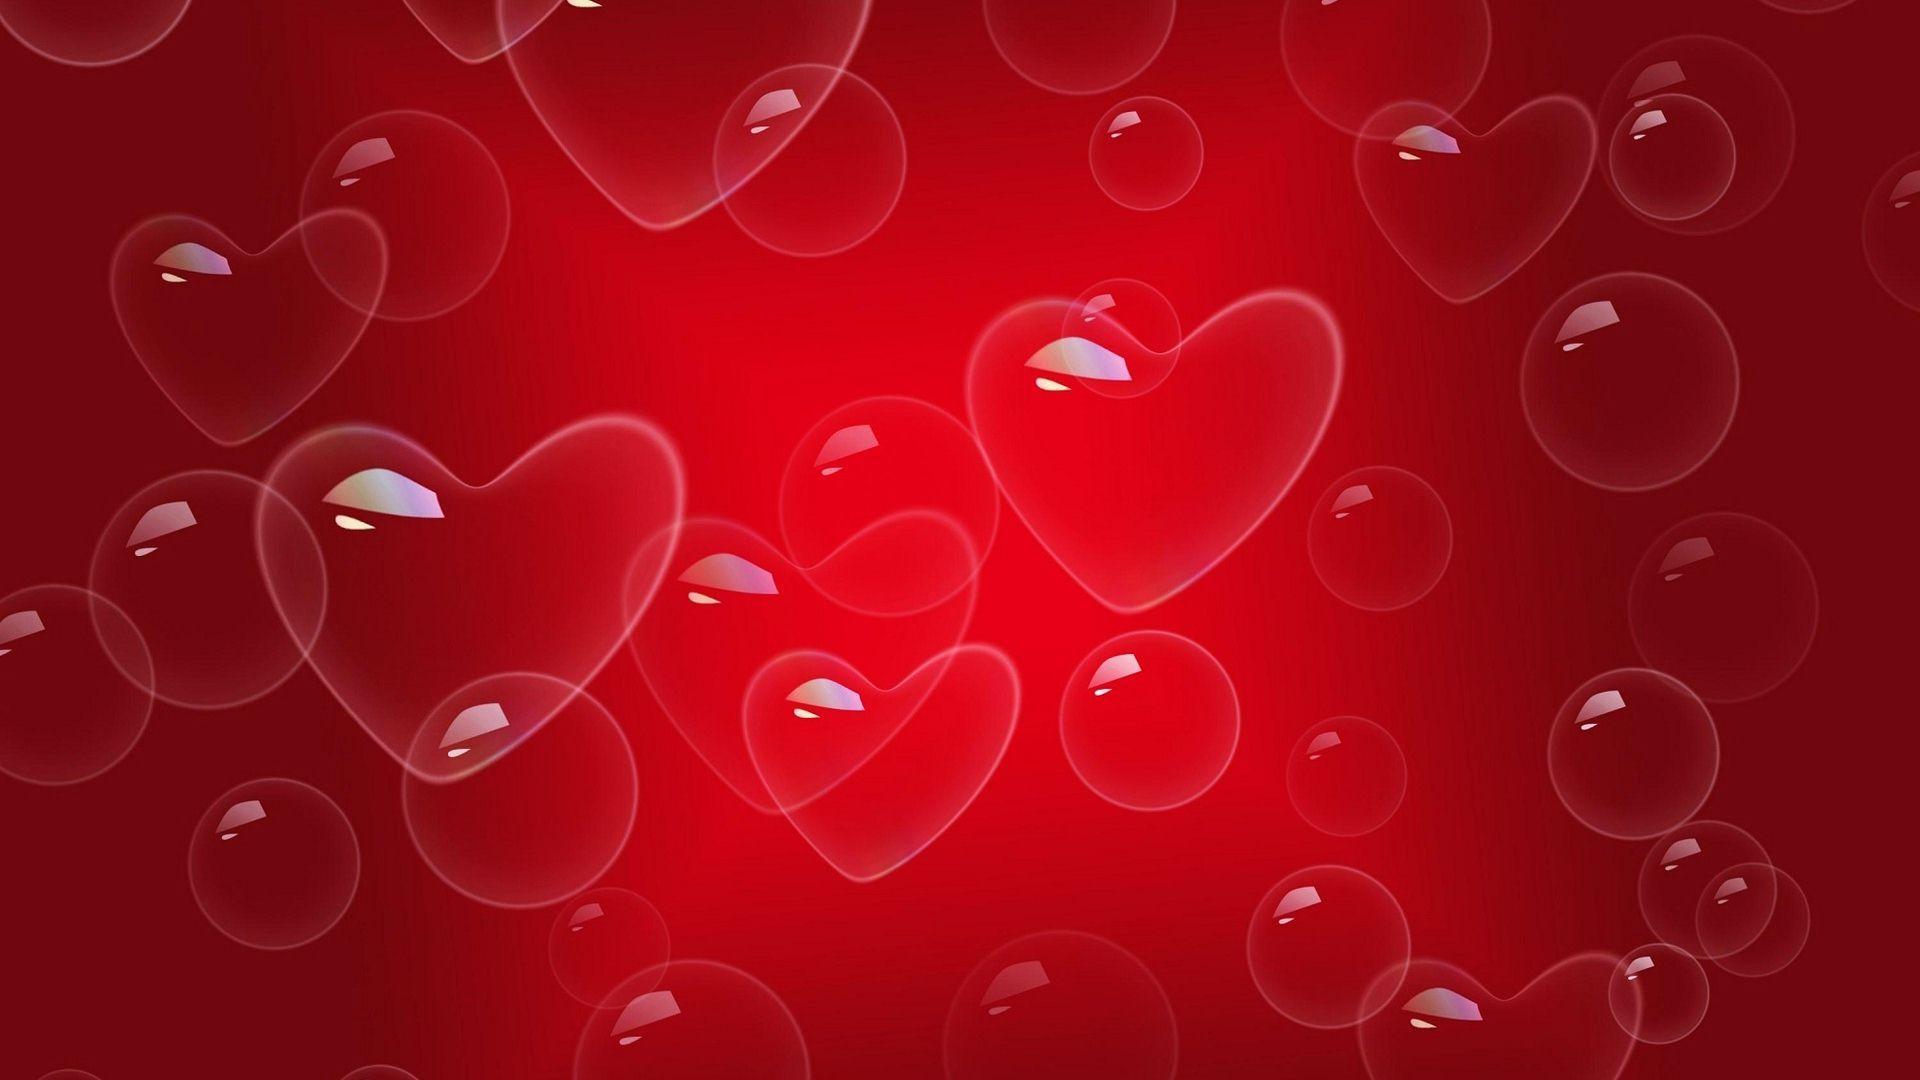 Love Heart Bubbles Red Background Image. HD Wallpaper Image